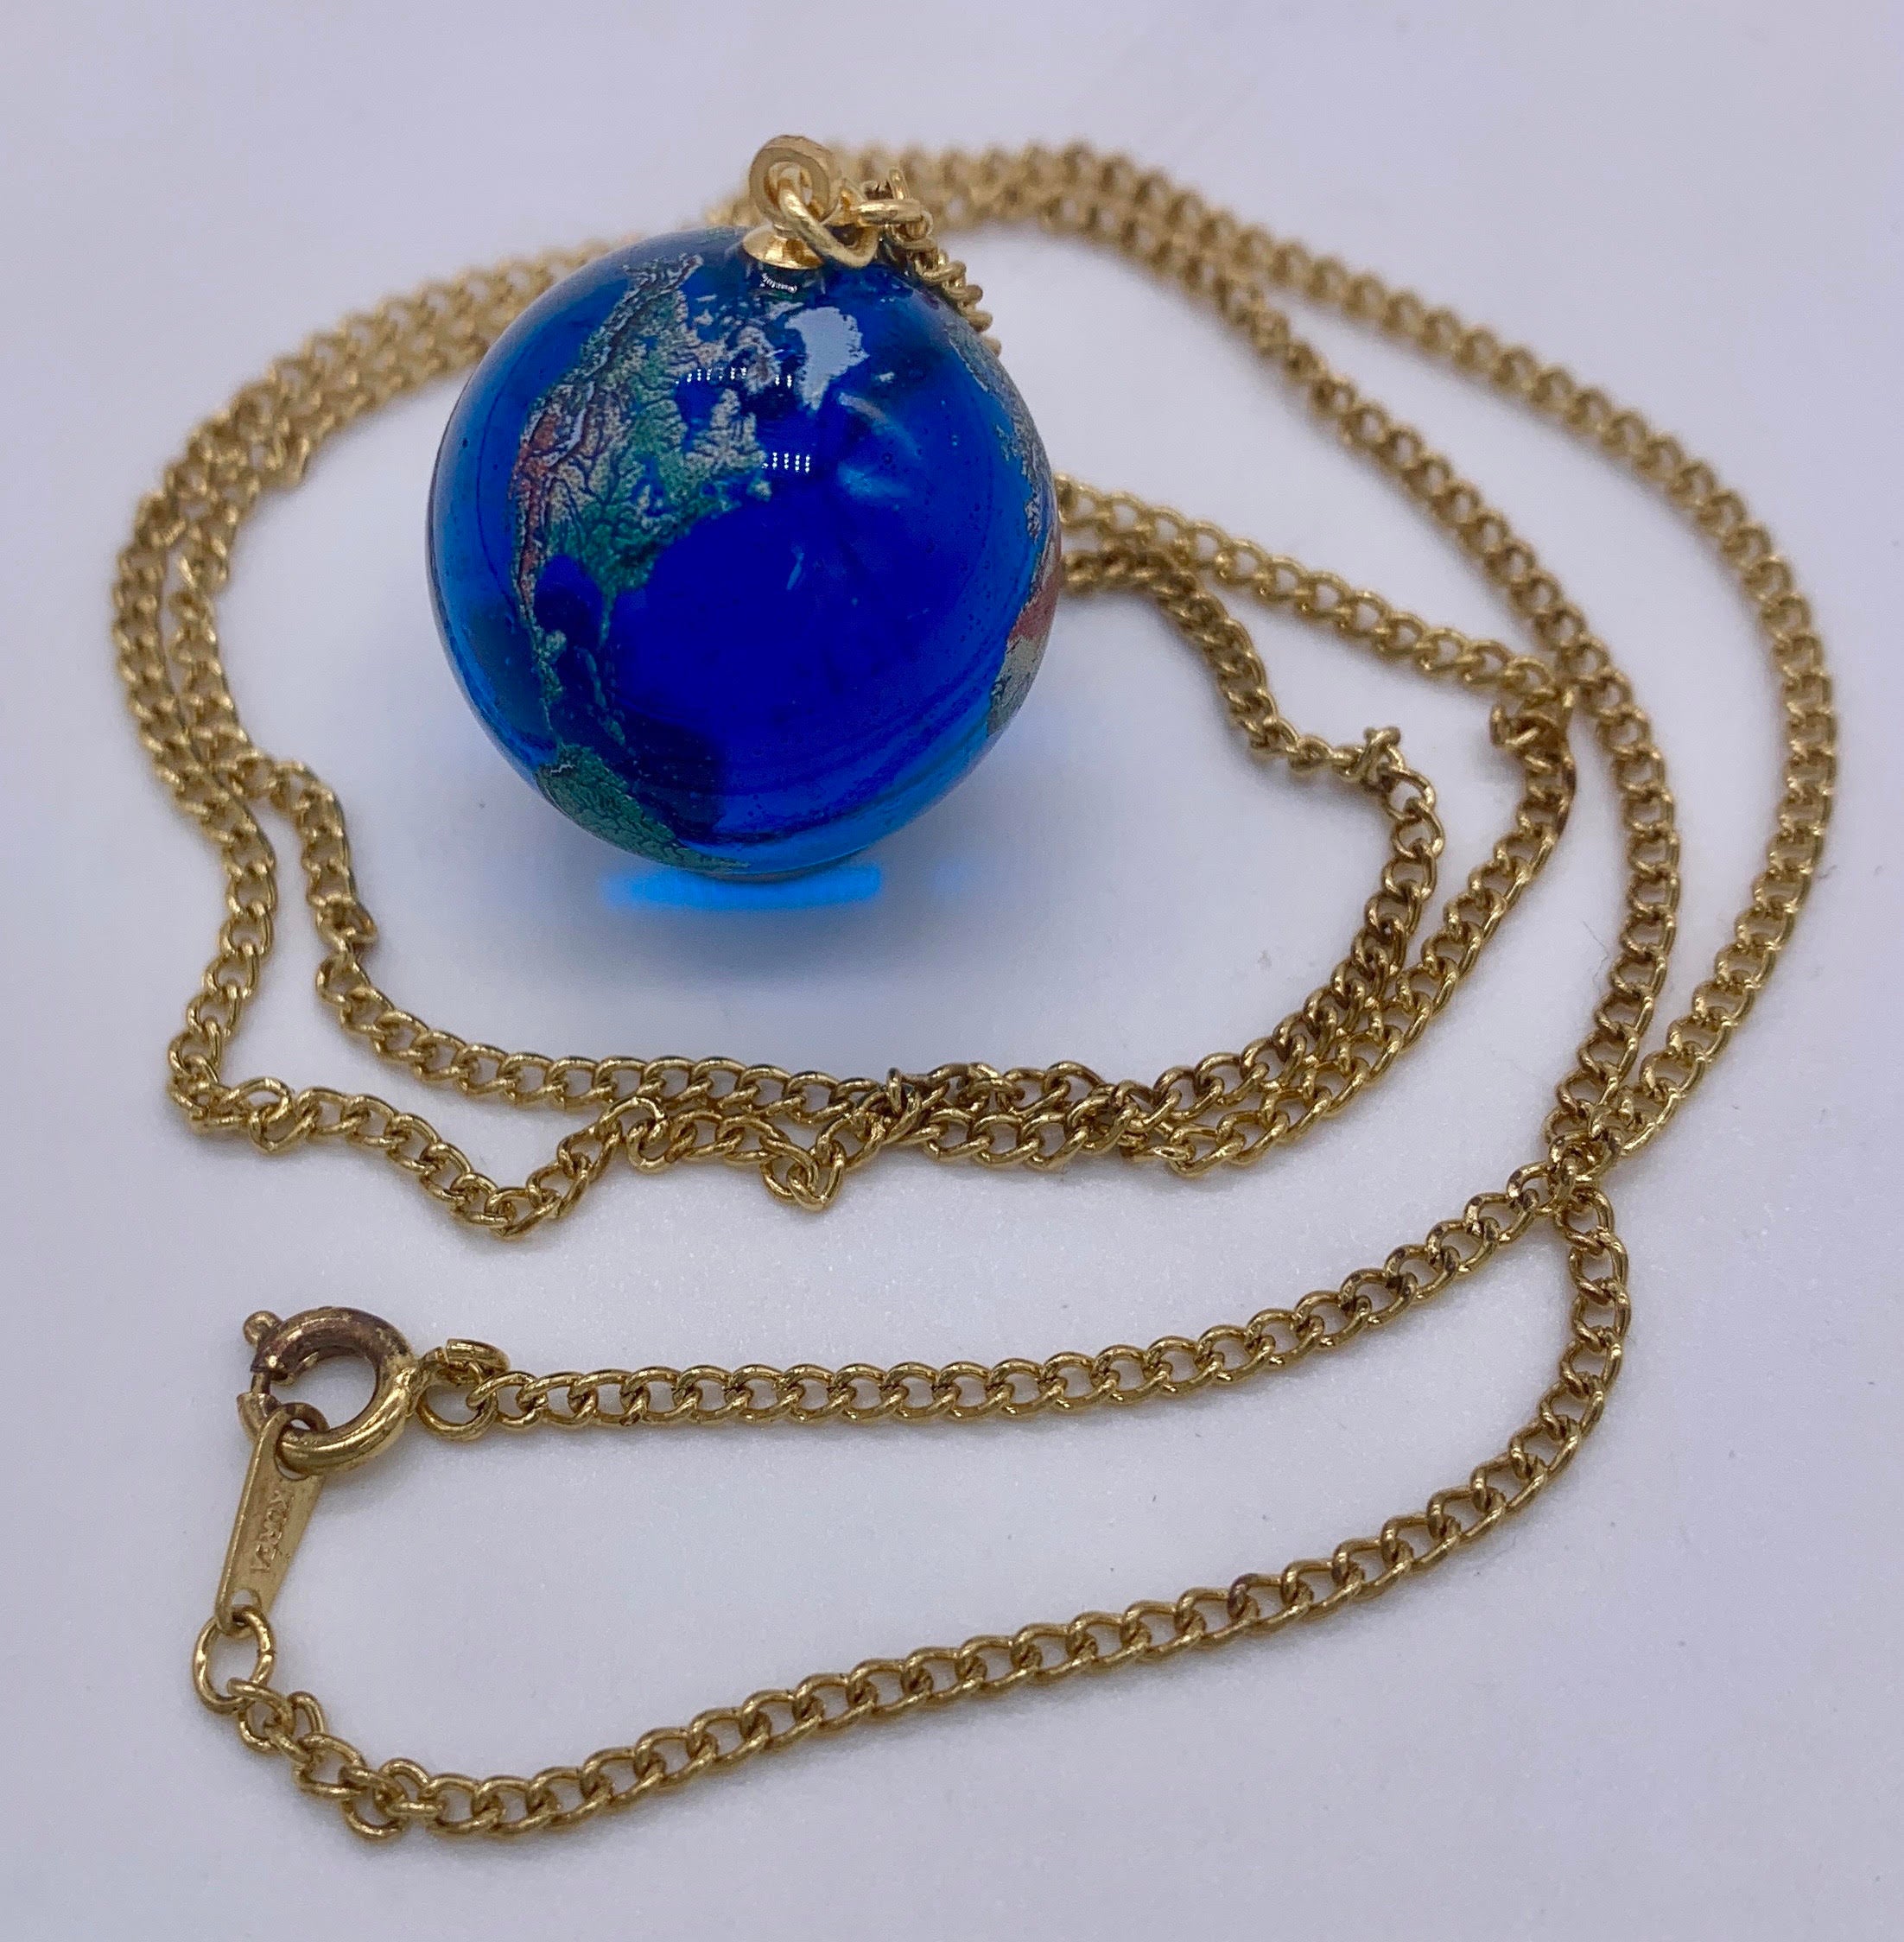 Celestial Jewelry Bundle + FREE Gold Fill Chain Necklace